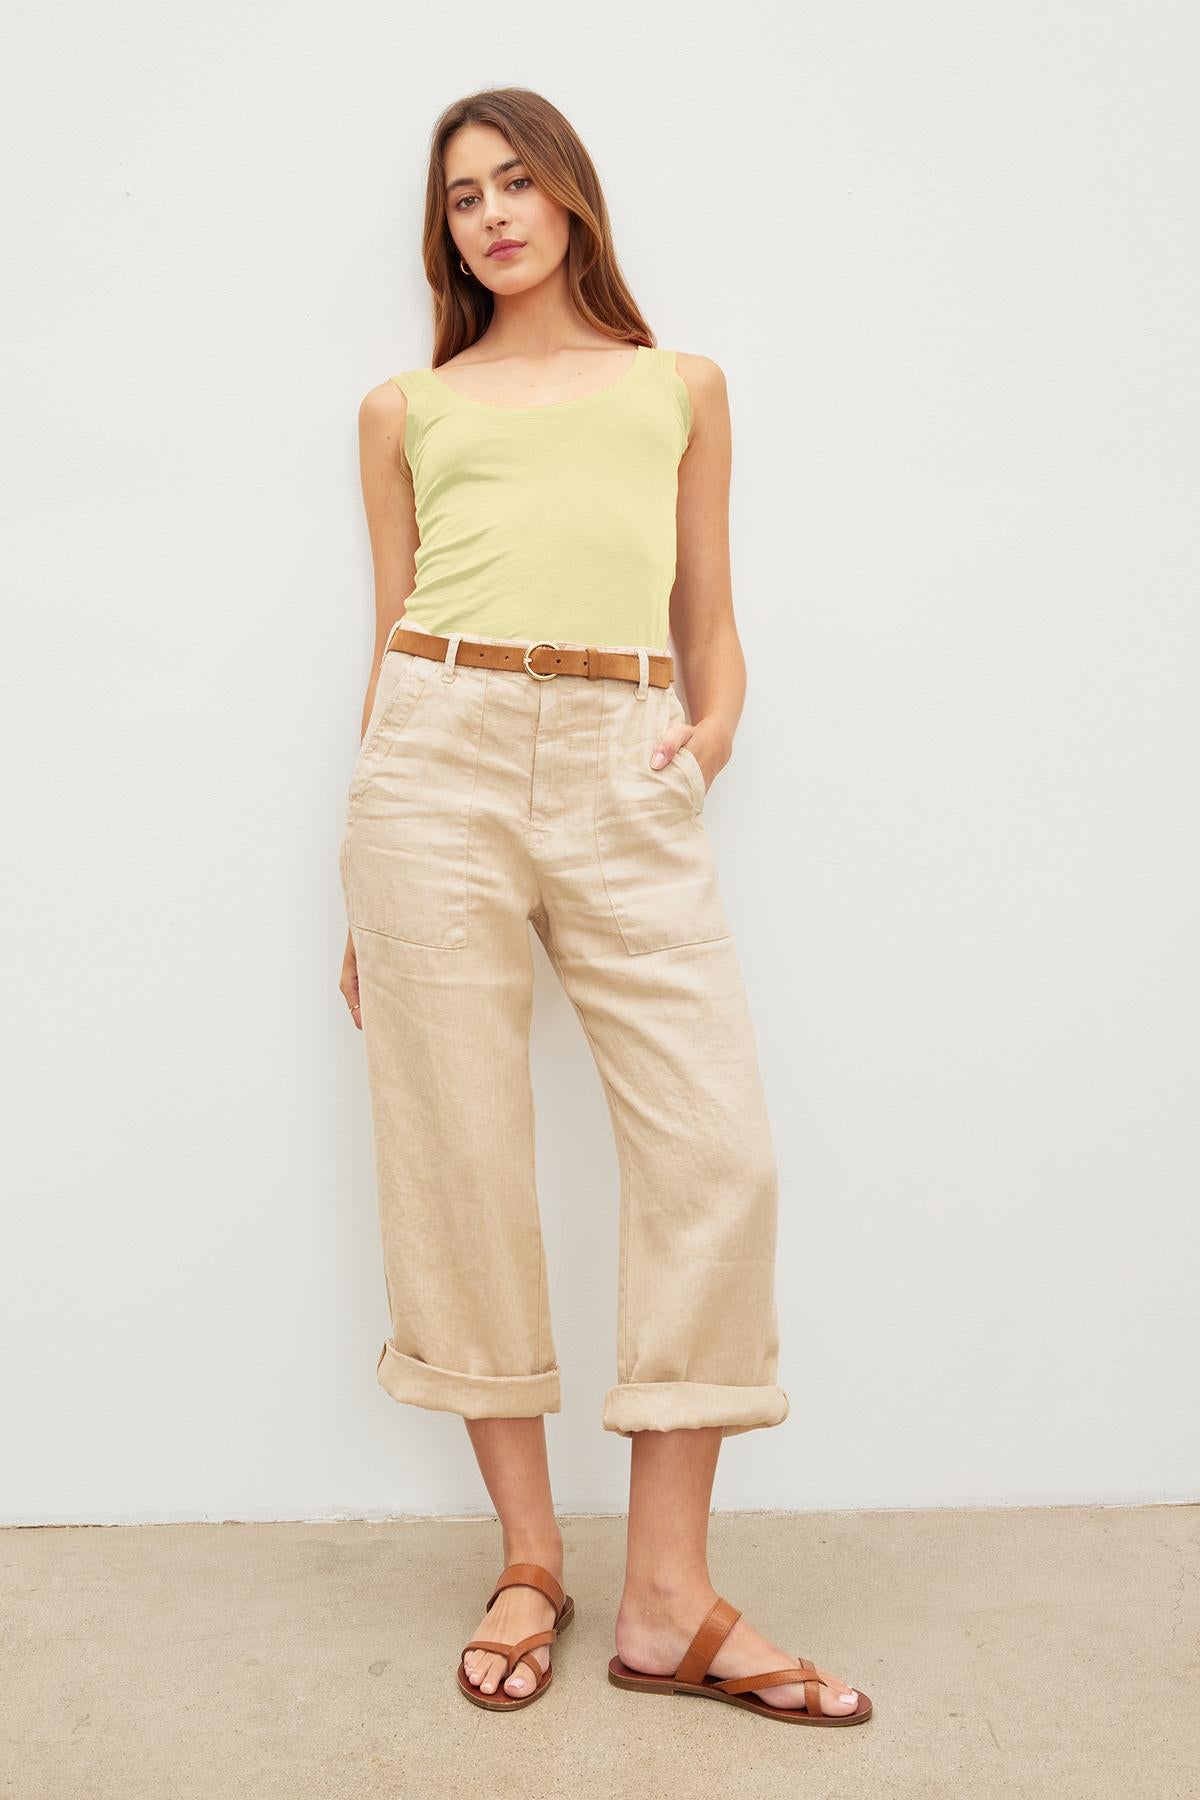 A woman stands posing in a Velvet by Graham & Spencer yellow MOSSY GAUZY WHISPER FITTED TANK, beige cropped pants with a belt, and brown sandals against a plain white background.-36910237647041